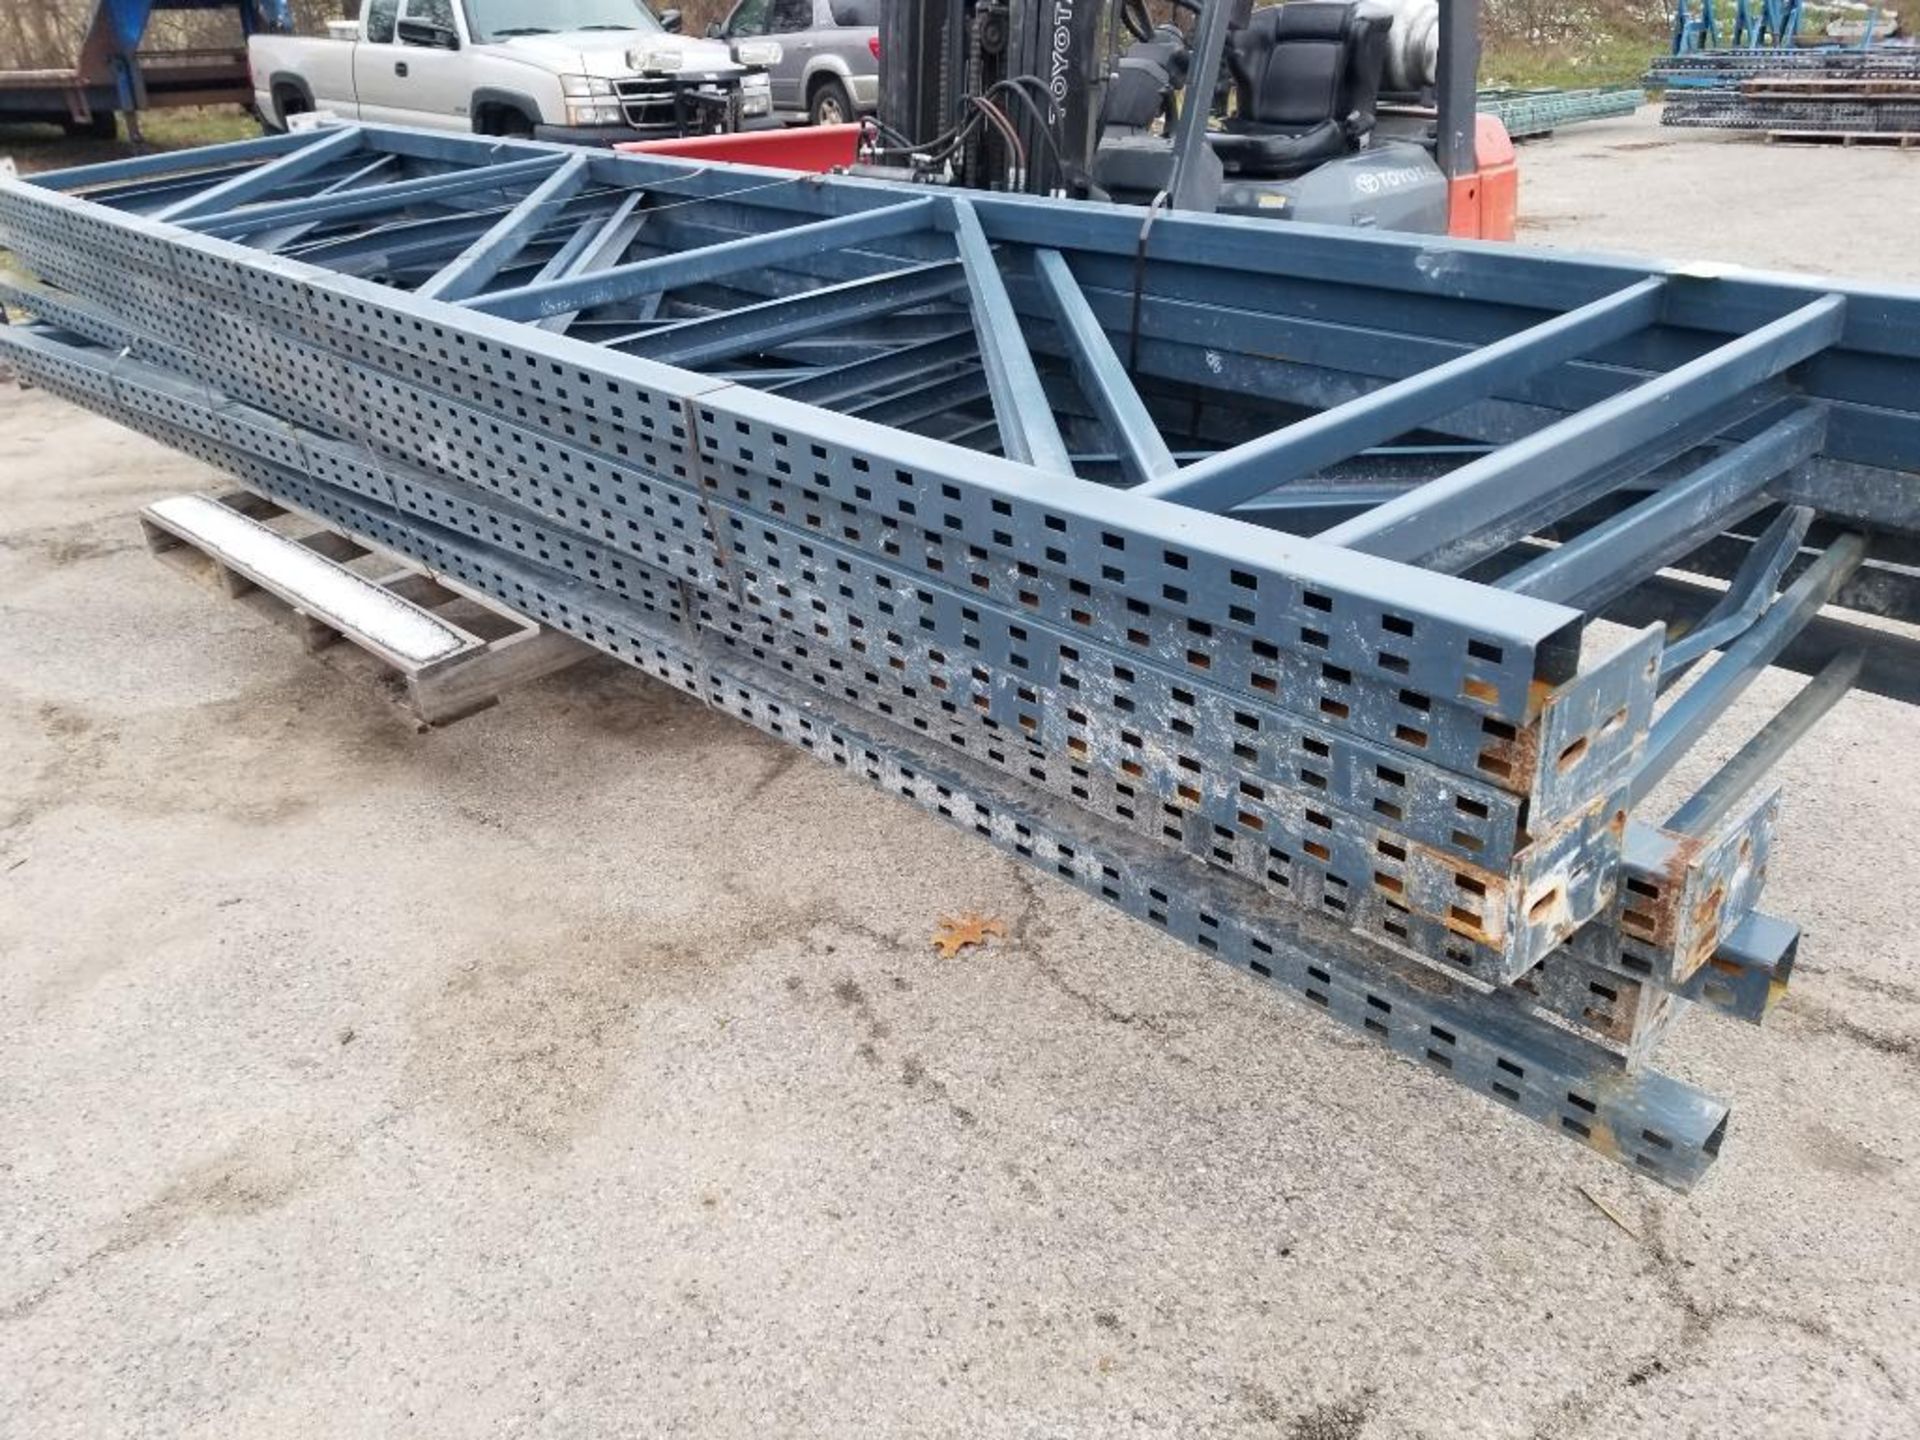 Qty 8 - Pallet racking uprights. 210in tall x 49in wide. - Image 3 of 7